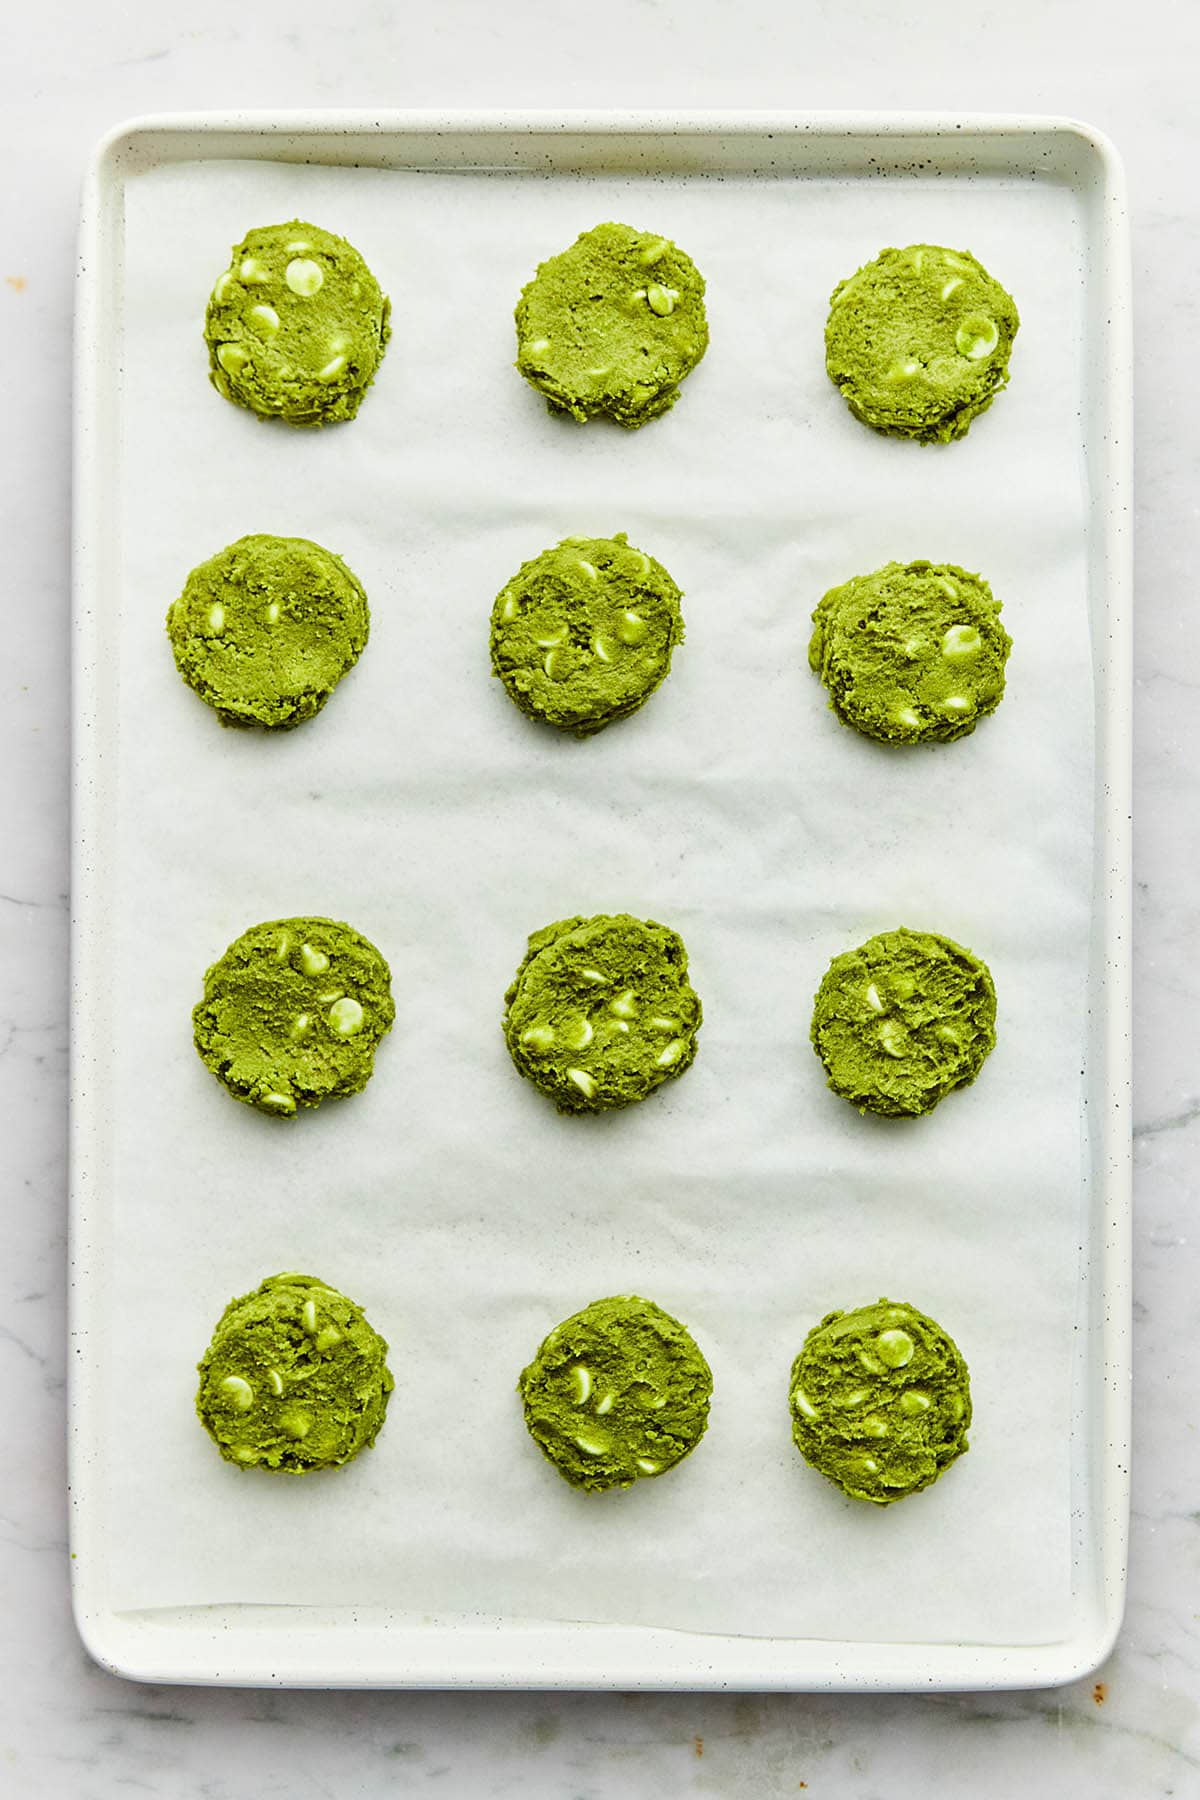 Slightly flattened green tea cookies about to go in the oven.